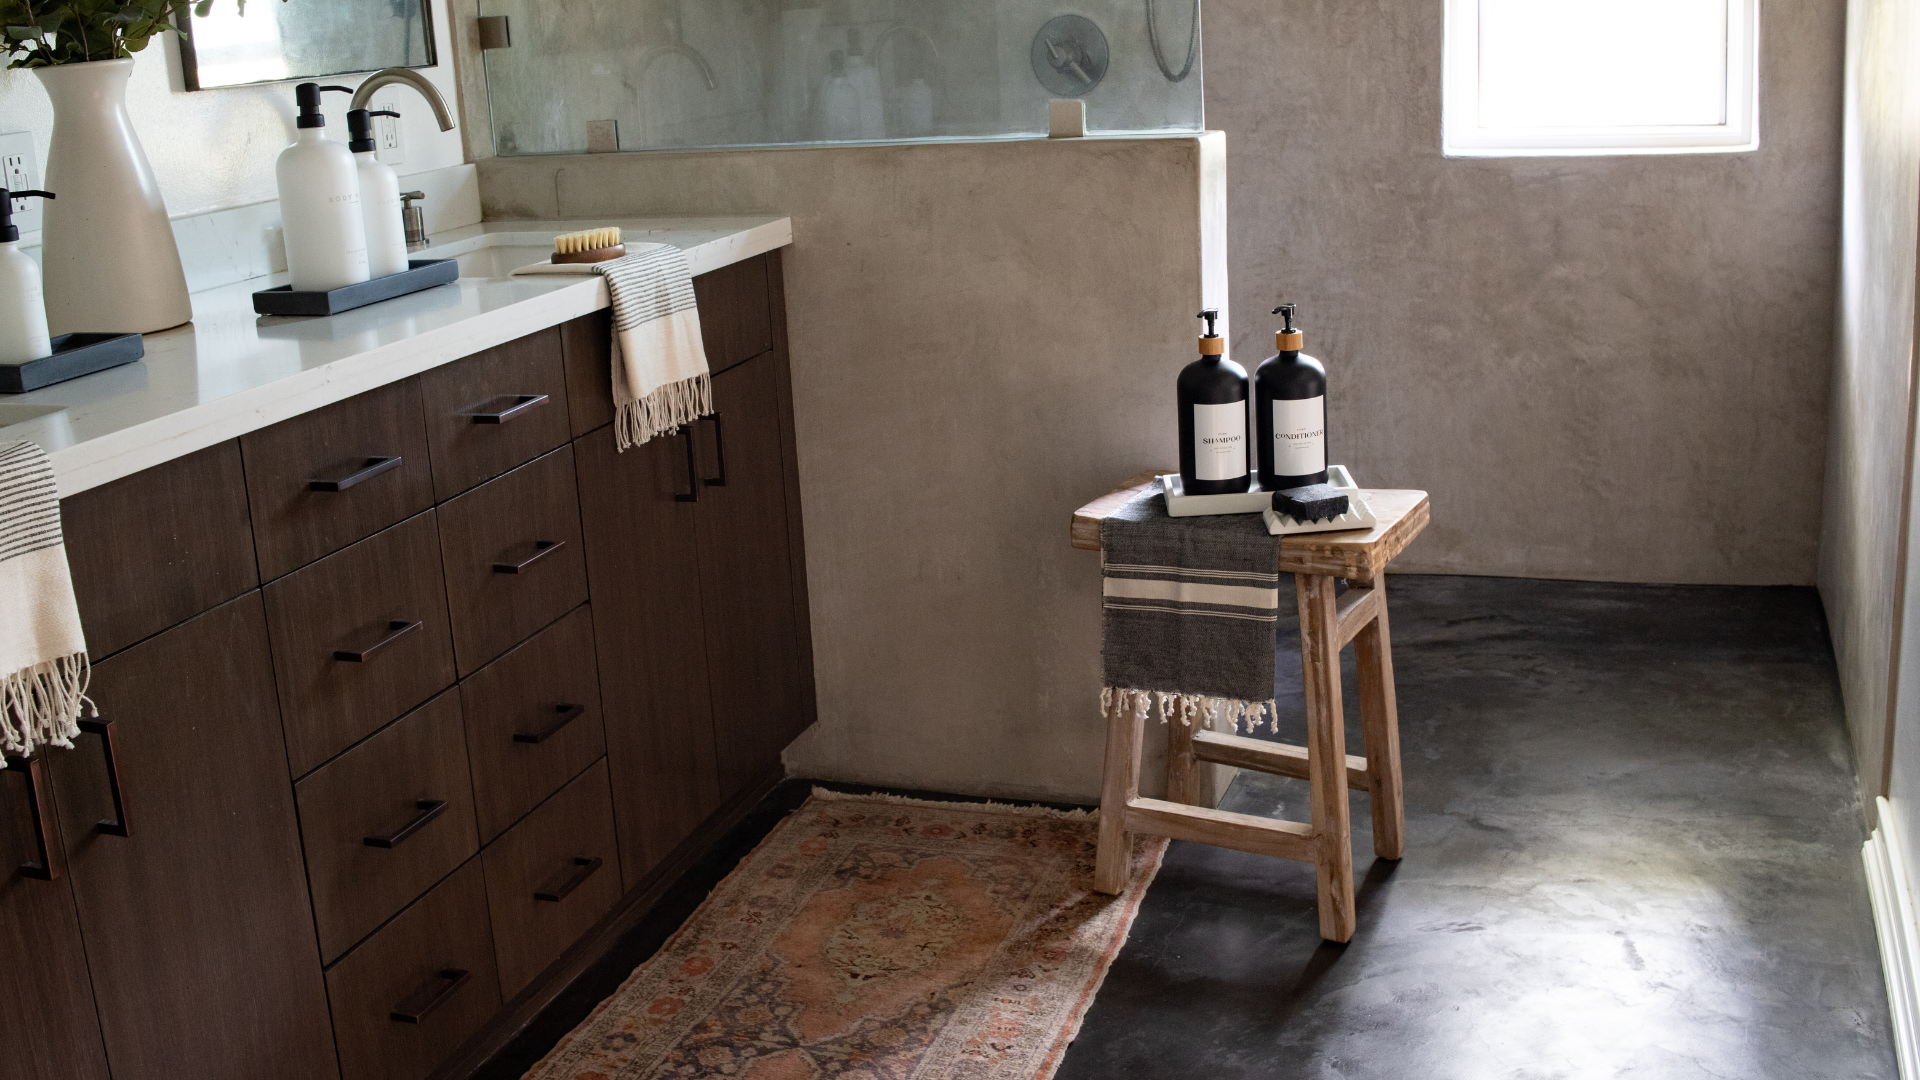 The Polished Jar Soap Dispensers and Hand Towel on Bathroom Bench